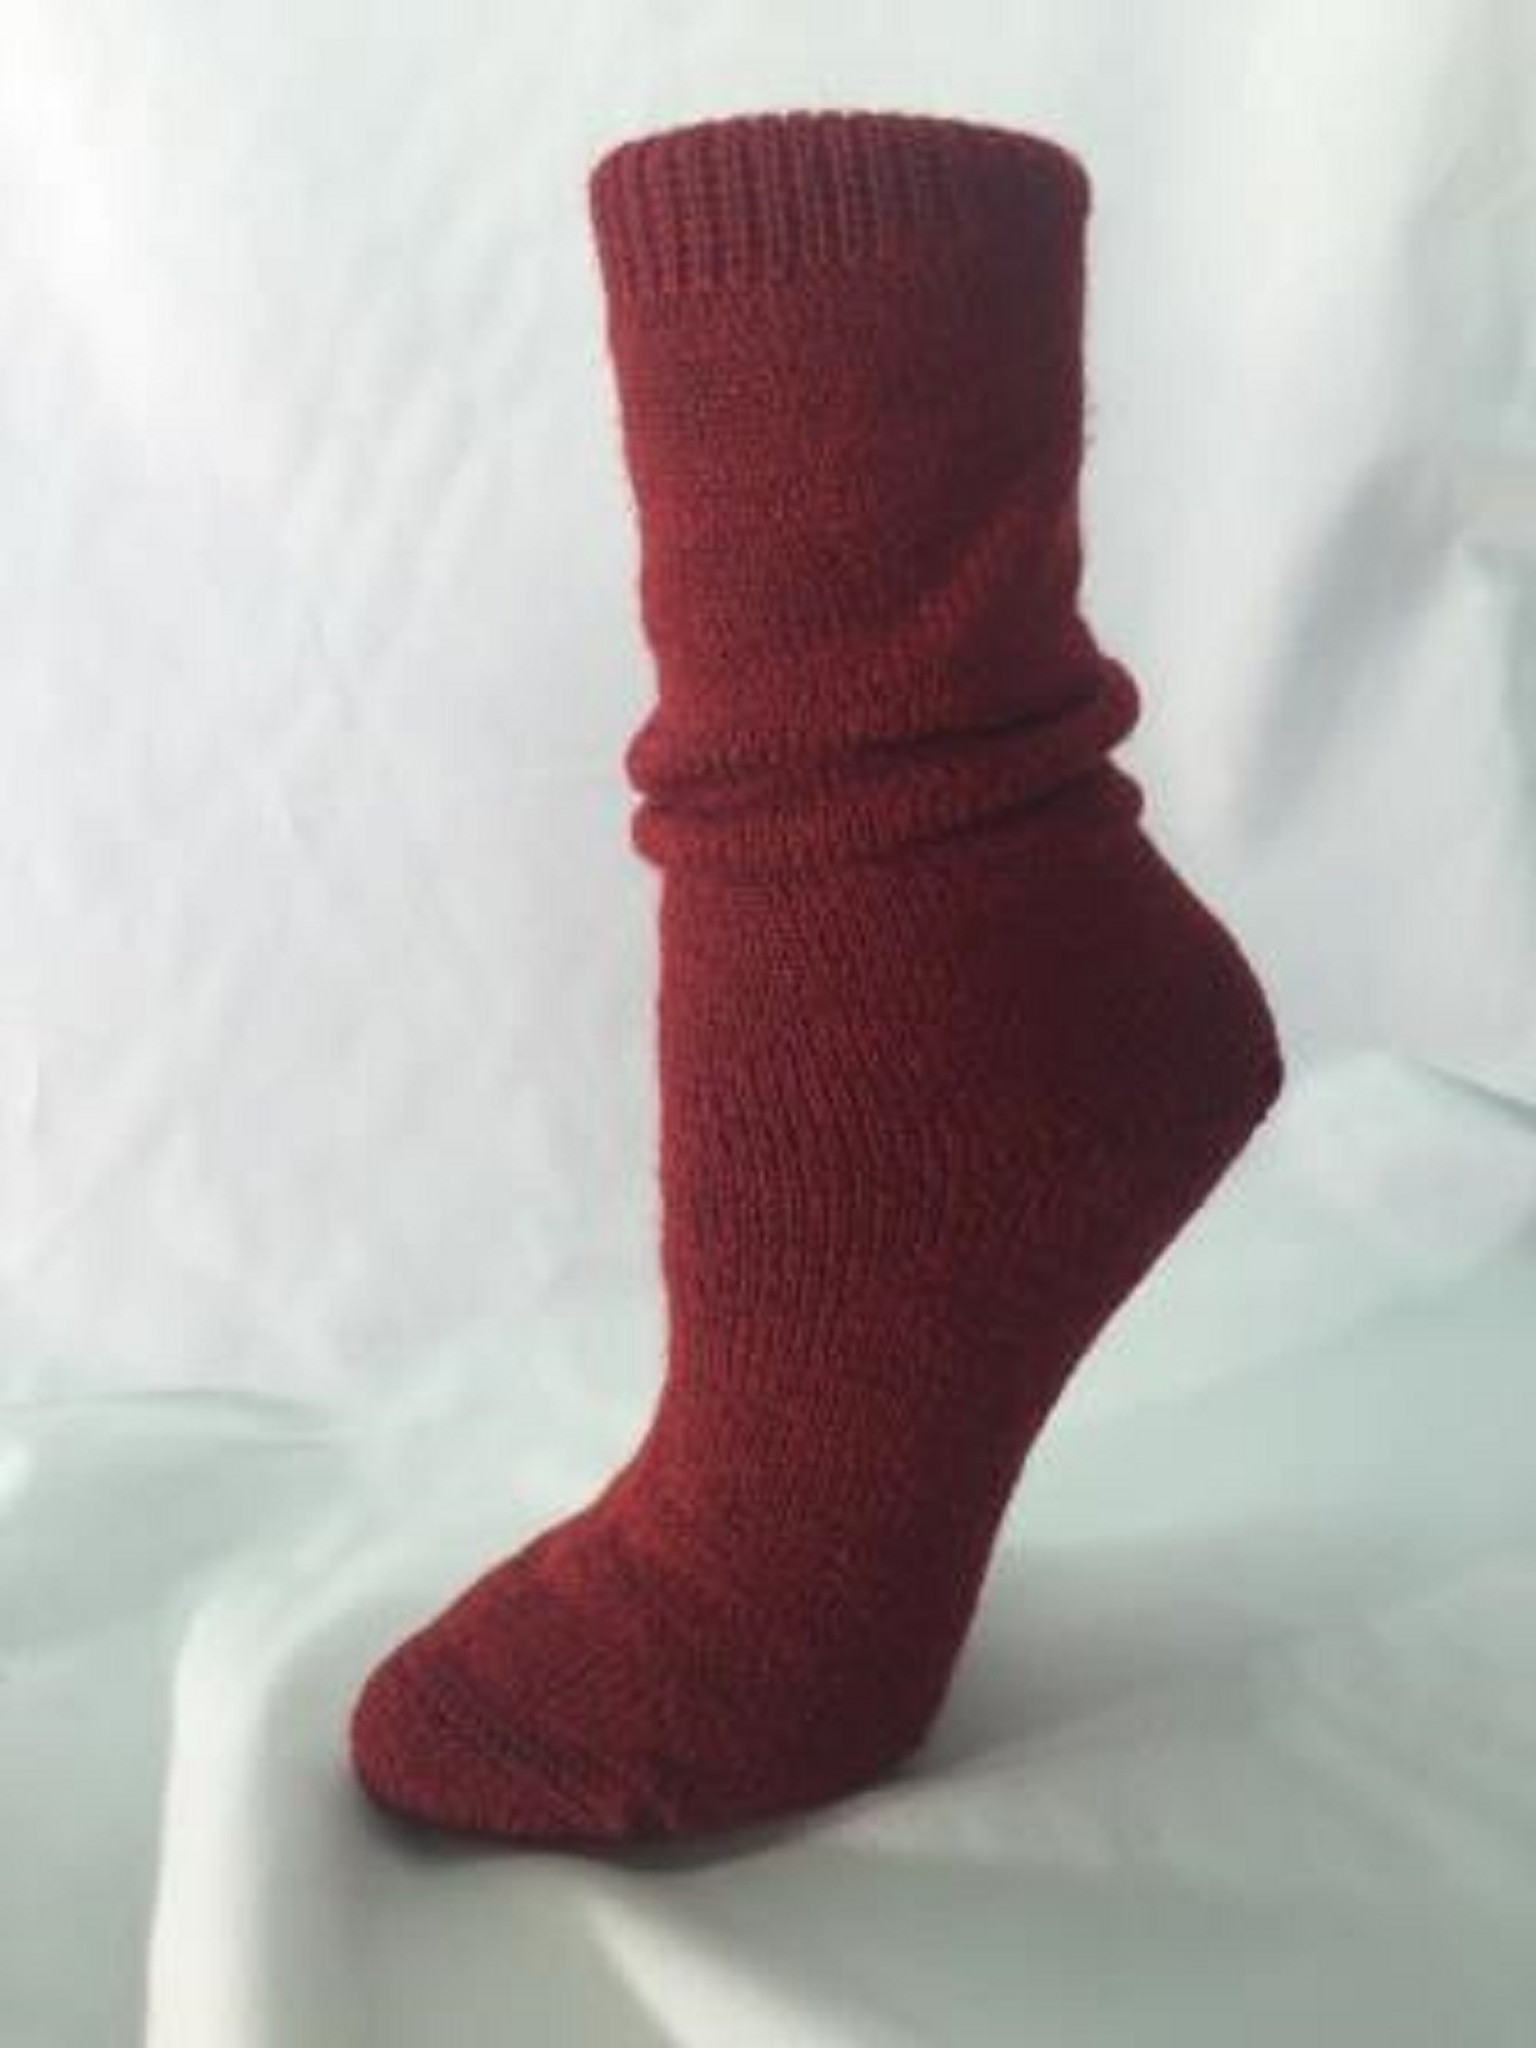 Hirsch Natur Child Sock - Thick Merino Wool – Warmth and Weather